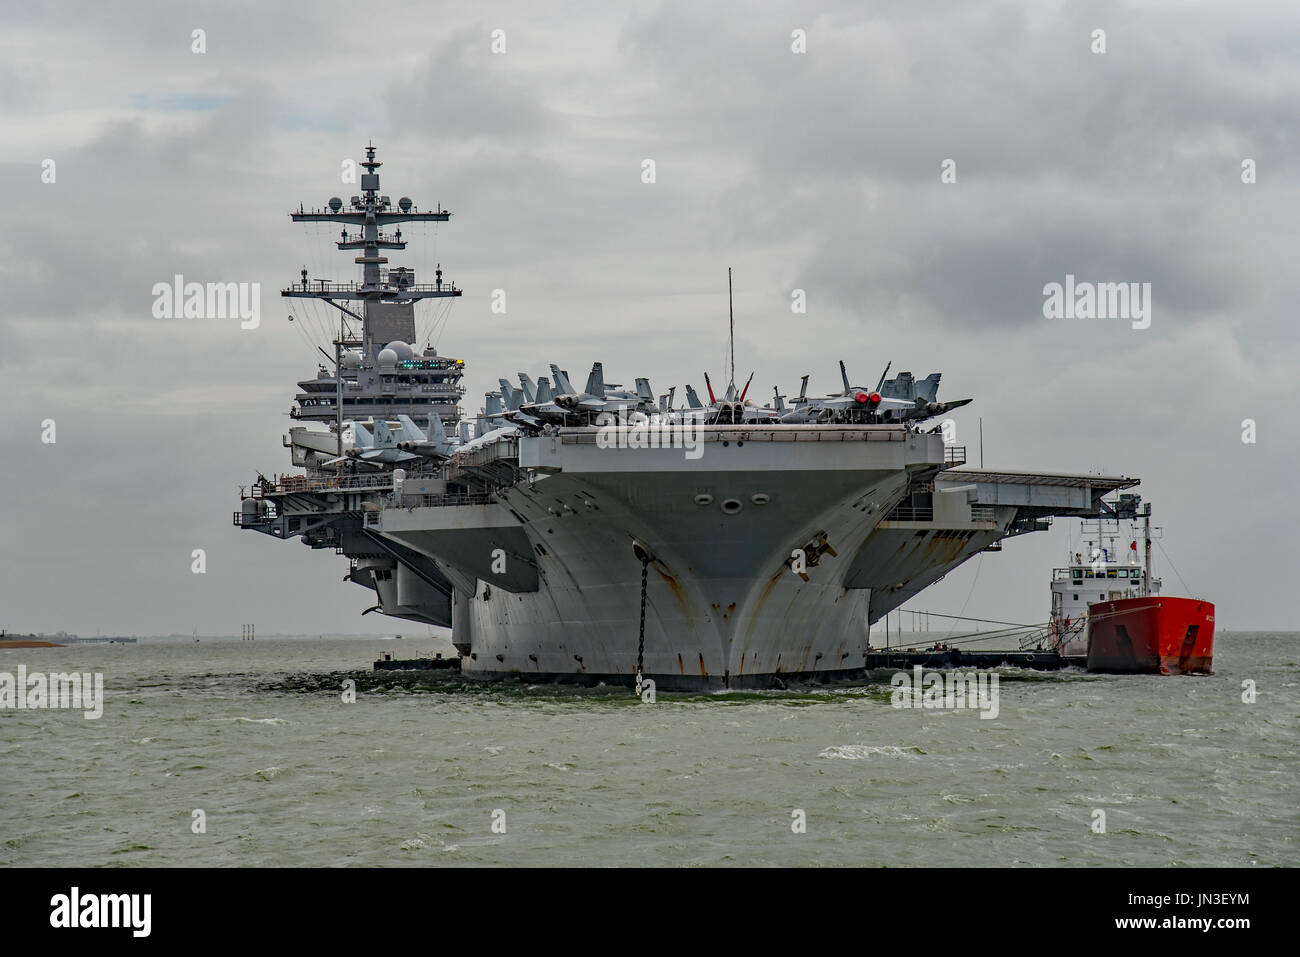 US Navy nuclear powered warship, the aircraft carrier USS George H W Bush on a visit to Portsmouth, UK by the United States Navy on 28/7/17. Stock Photo